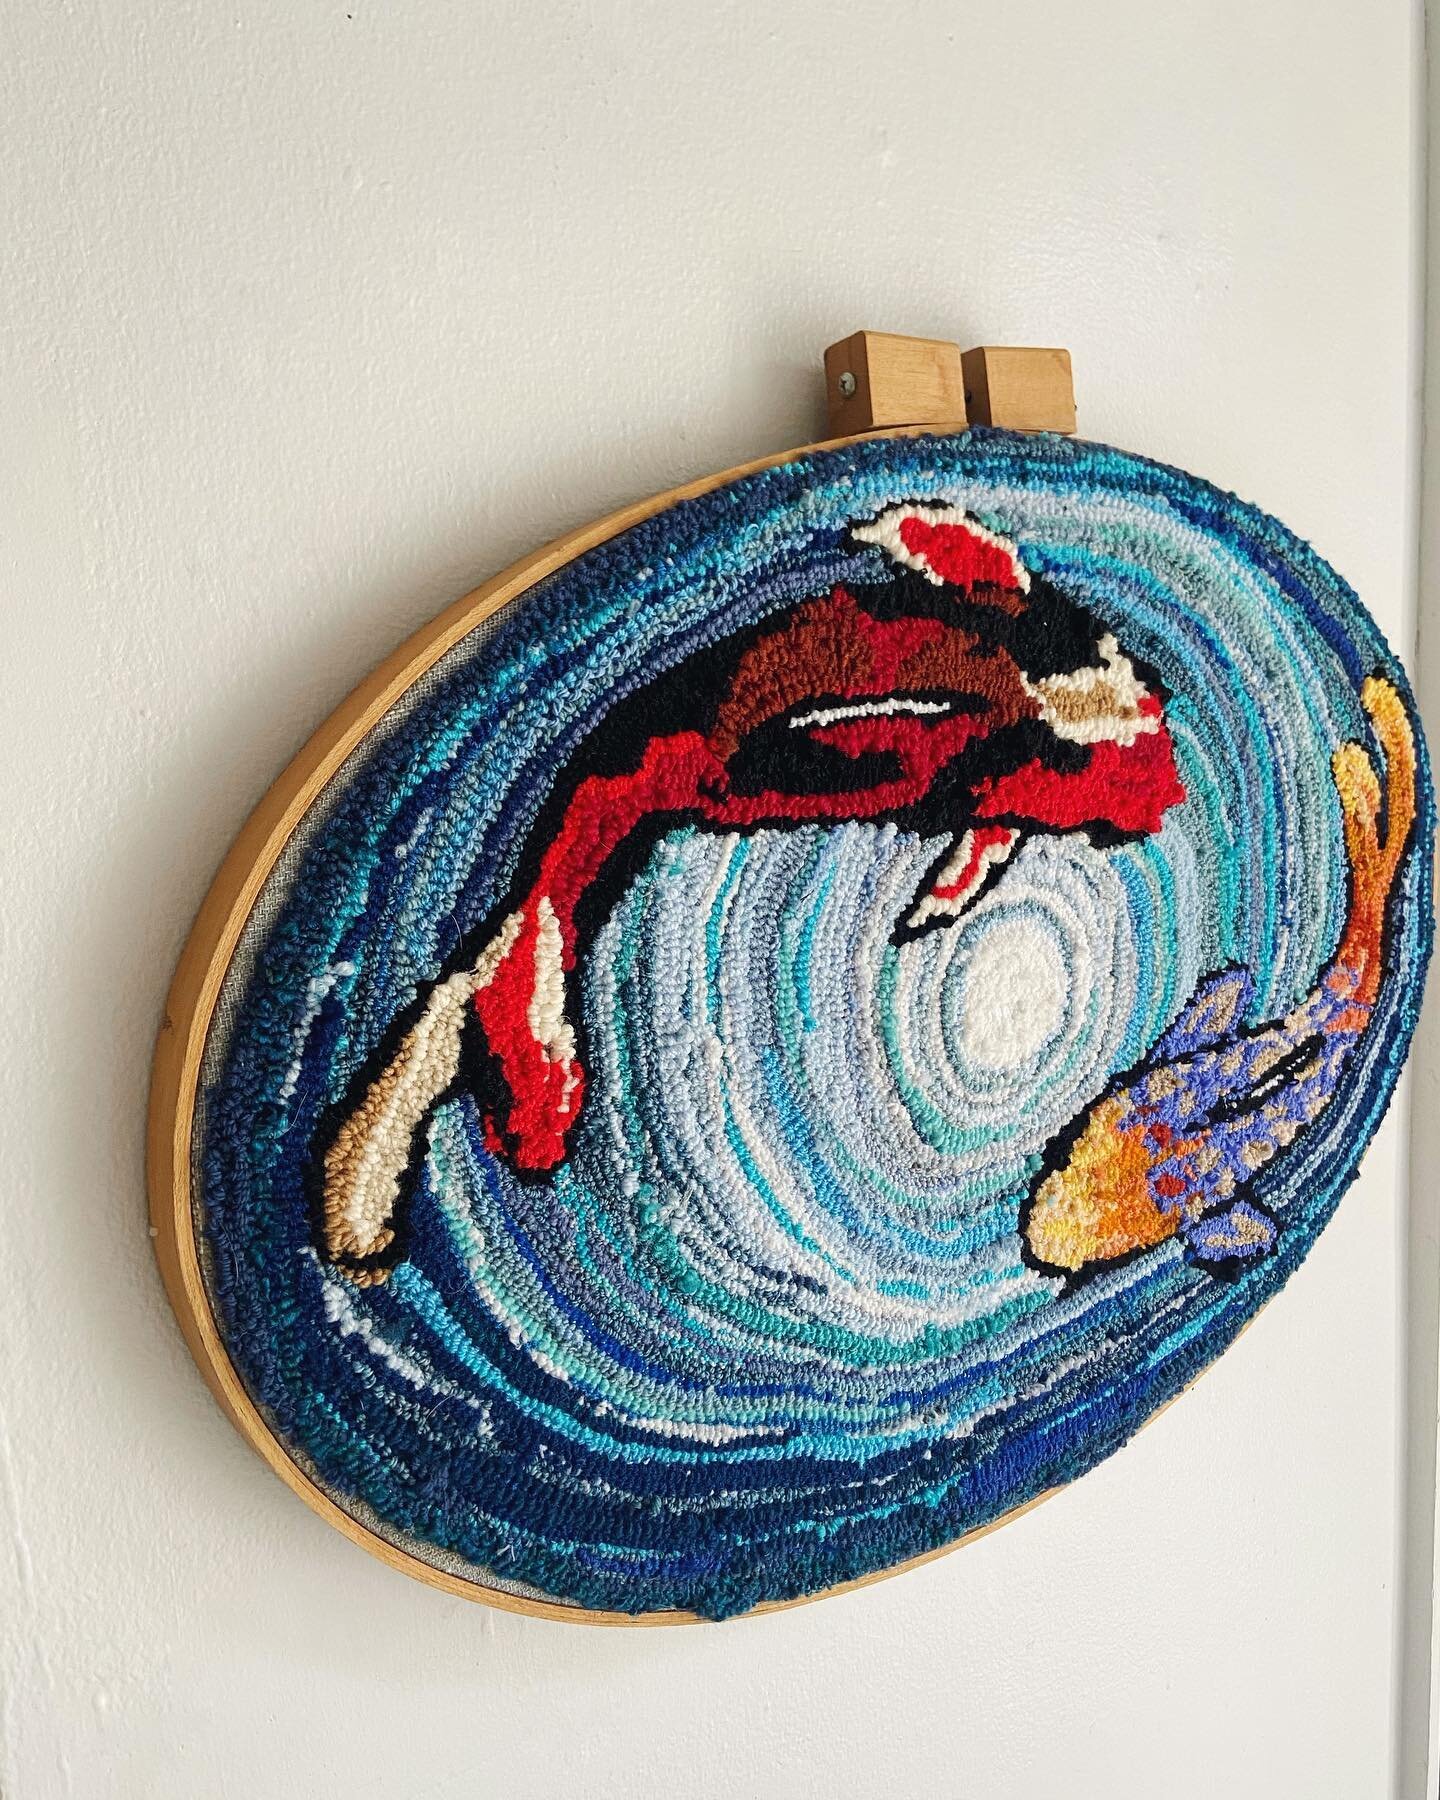 A few details from my newly finished koi pond! Made from scrap yarn and repurposed embroidery hoop all c/o @indigohippo ♻️
.
.
.
.
.
.
.
.
.
#tuftinggun #tufttheworld #tufting #tuftingmachine #tufting #tufted #tapestry #tapestrydecor #walltapestry #r